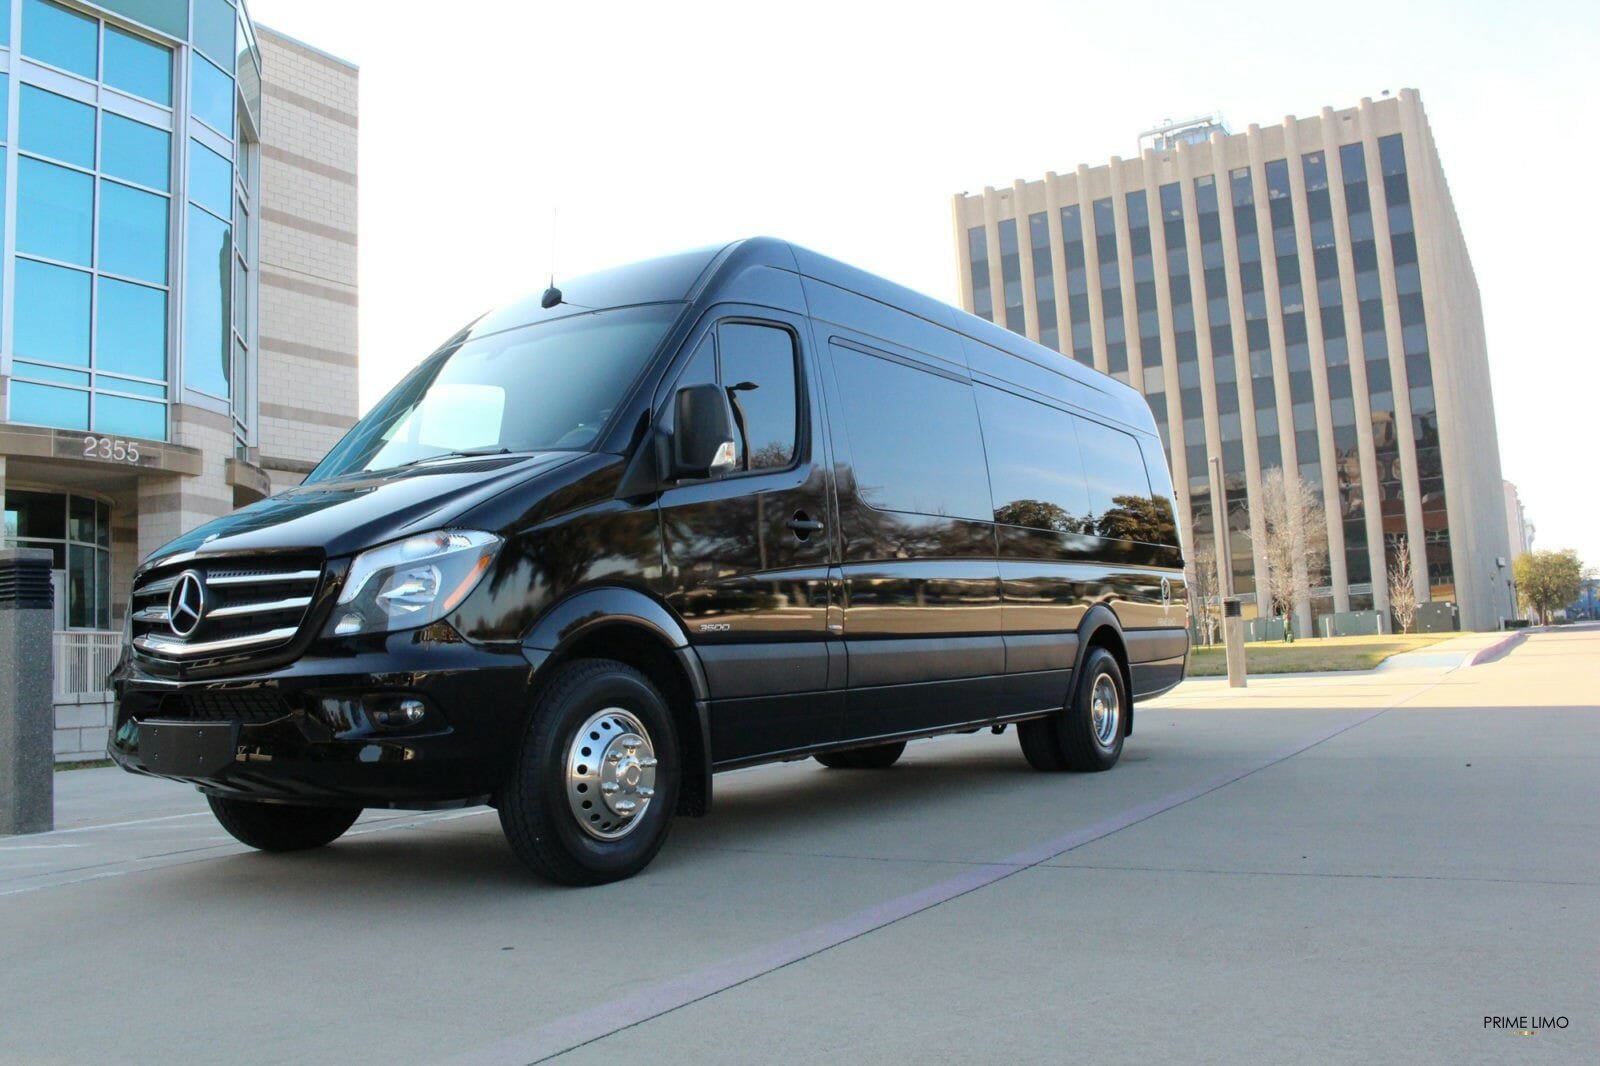 Check out this nine-seater ultra-lux Mercedes Sprinter-based swaggerwagon